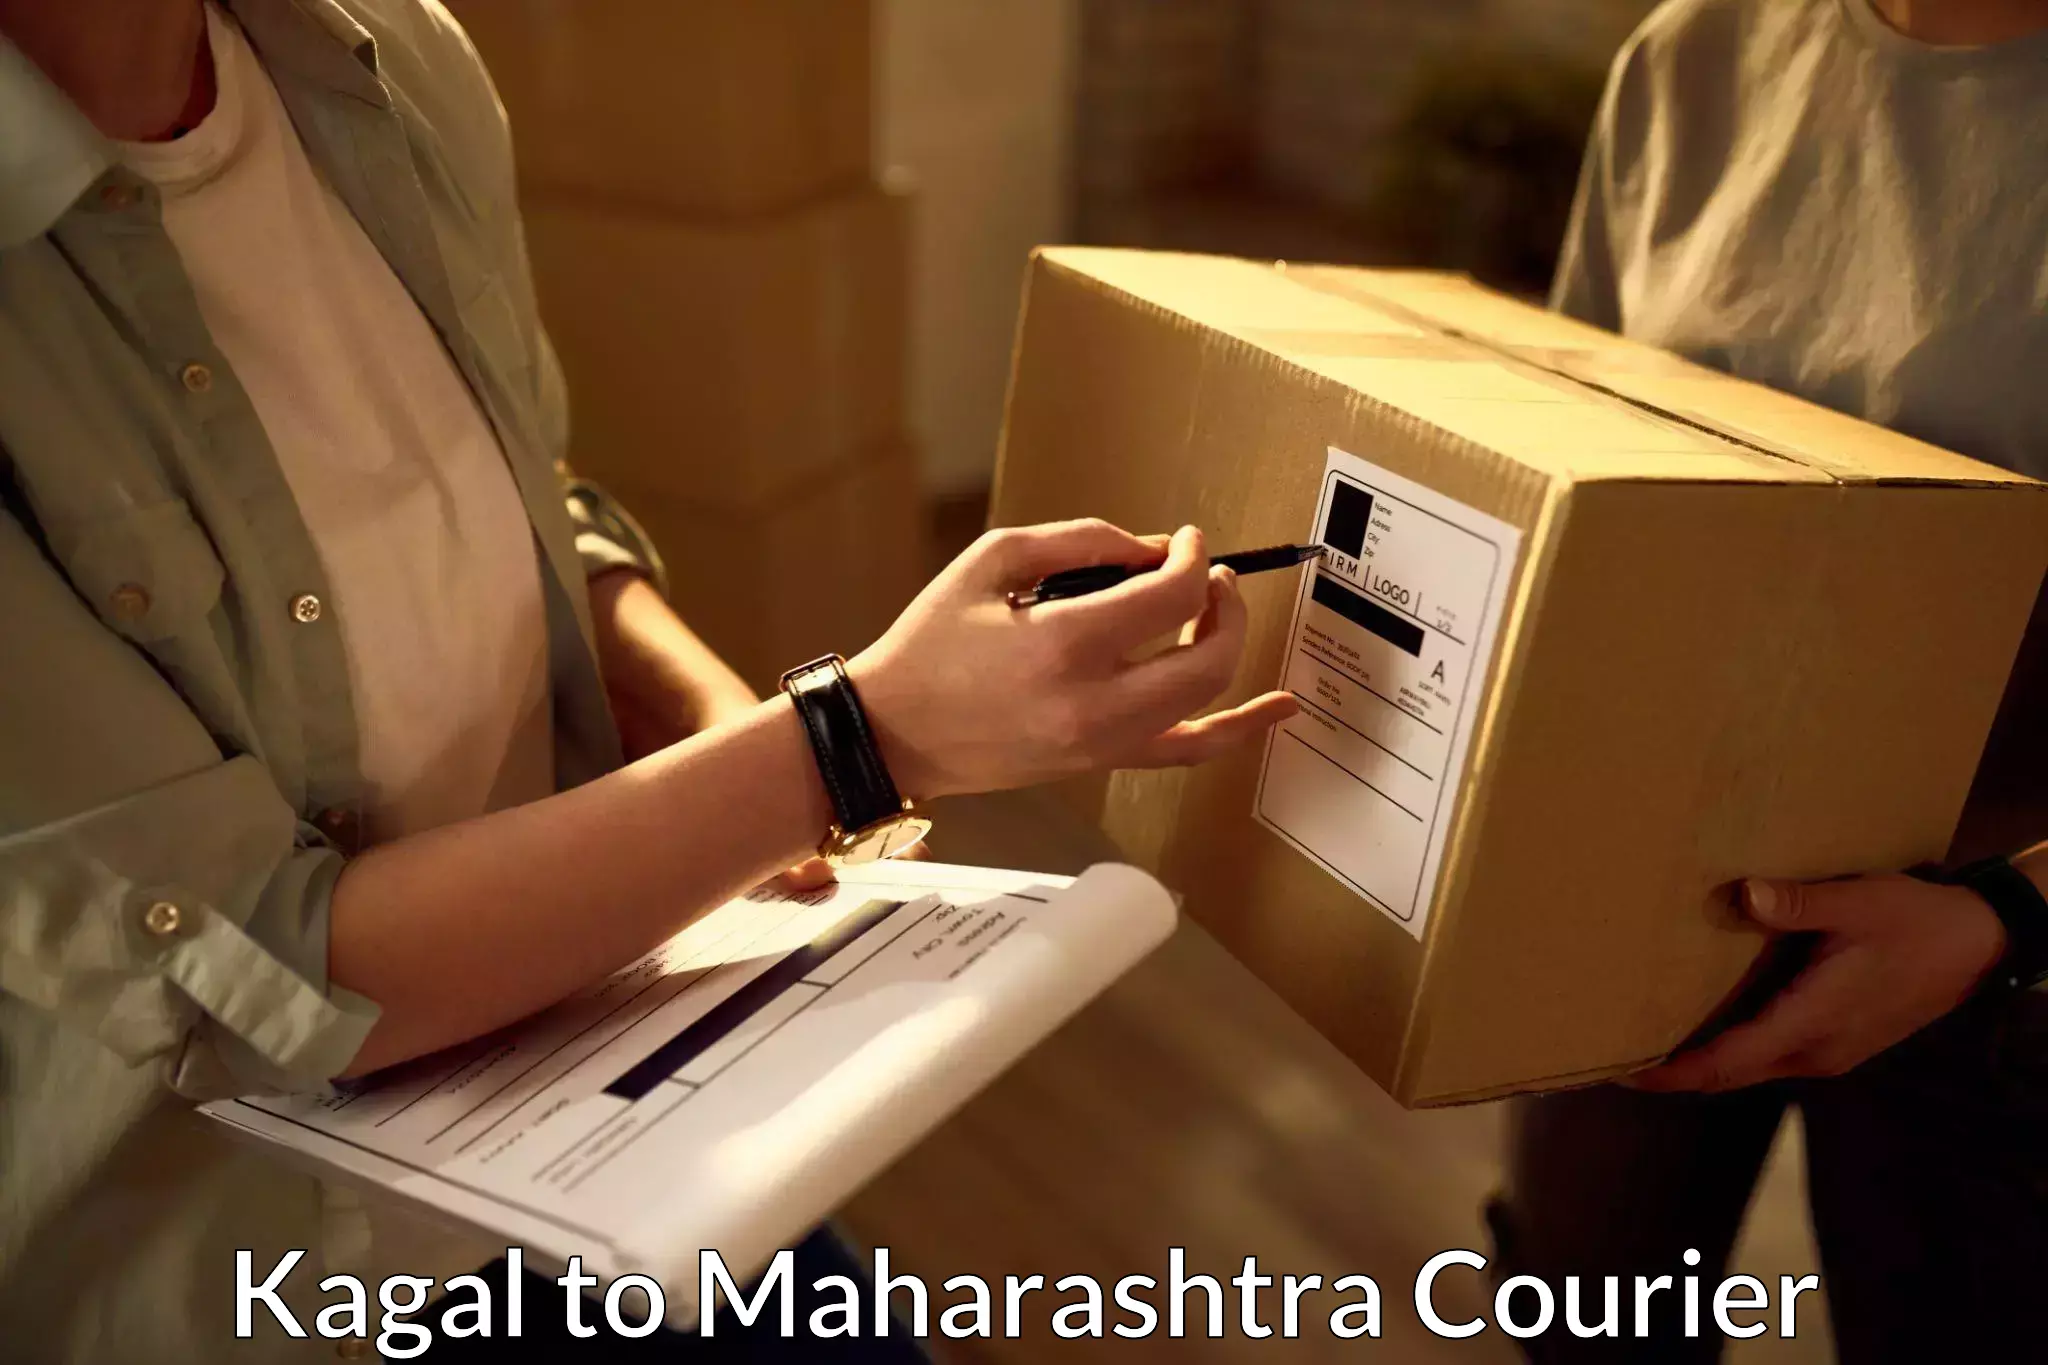 Automated parcel services Kagal to Andheri